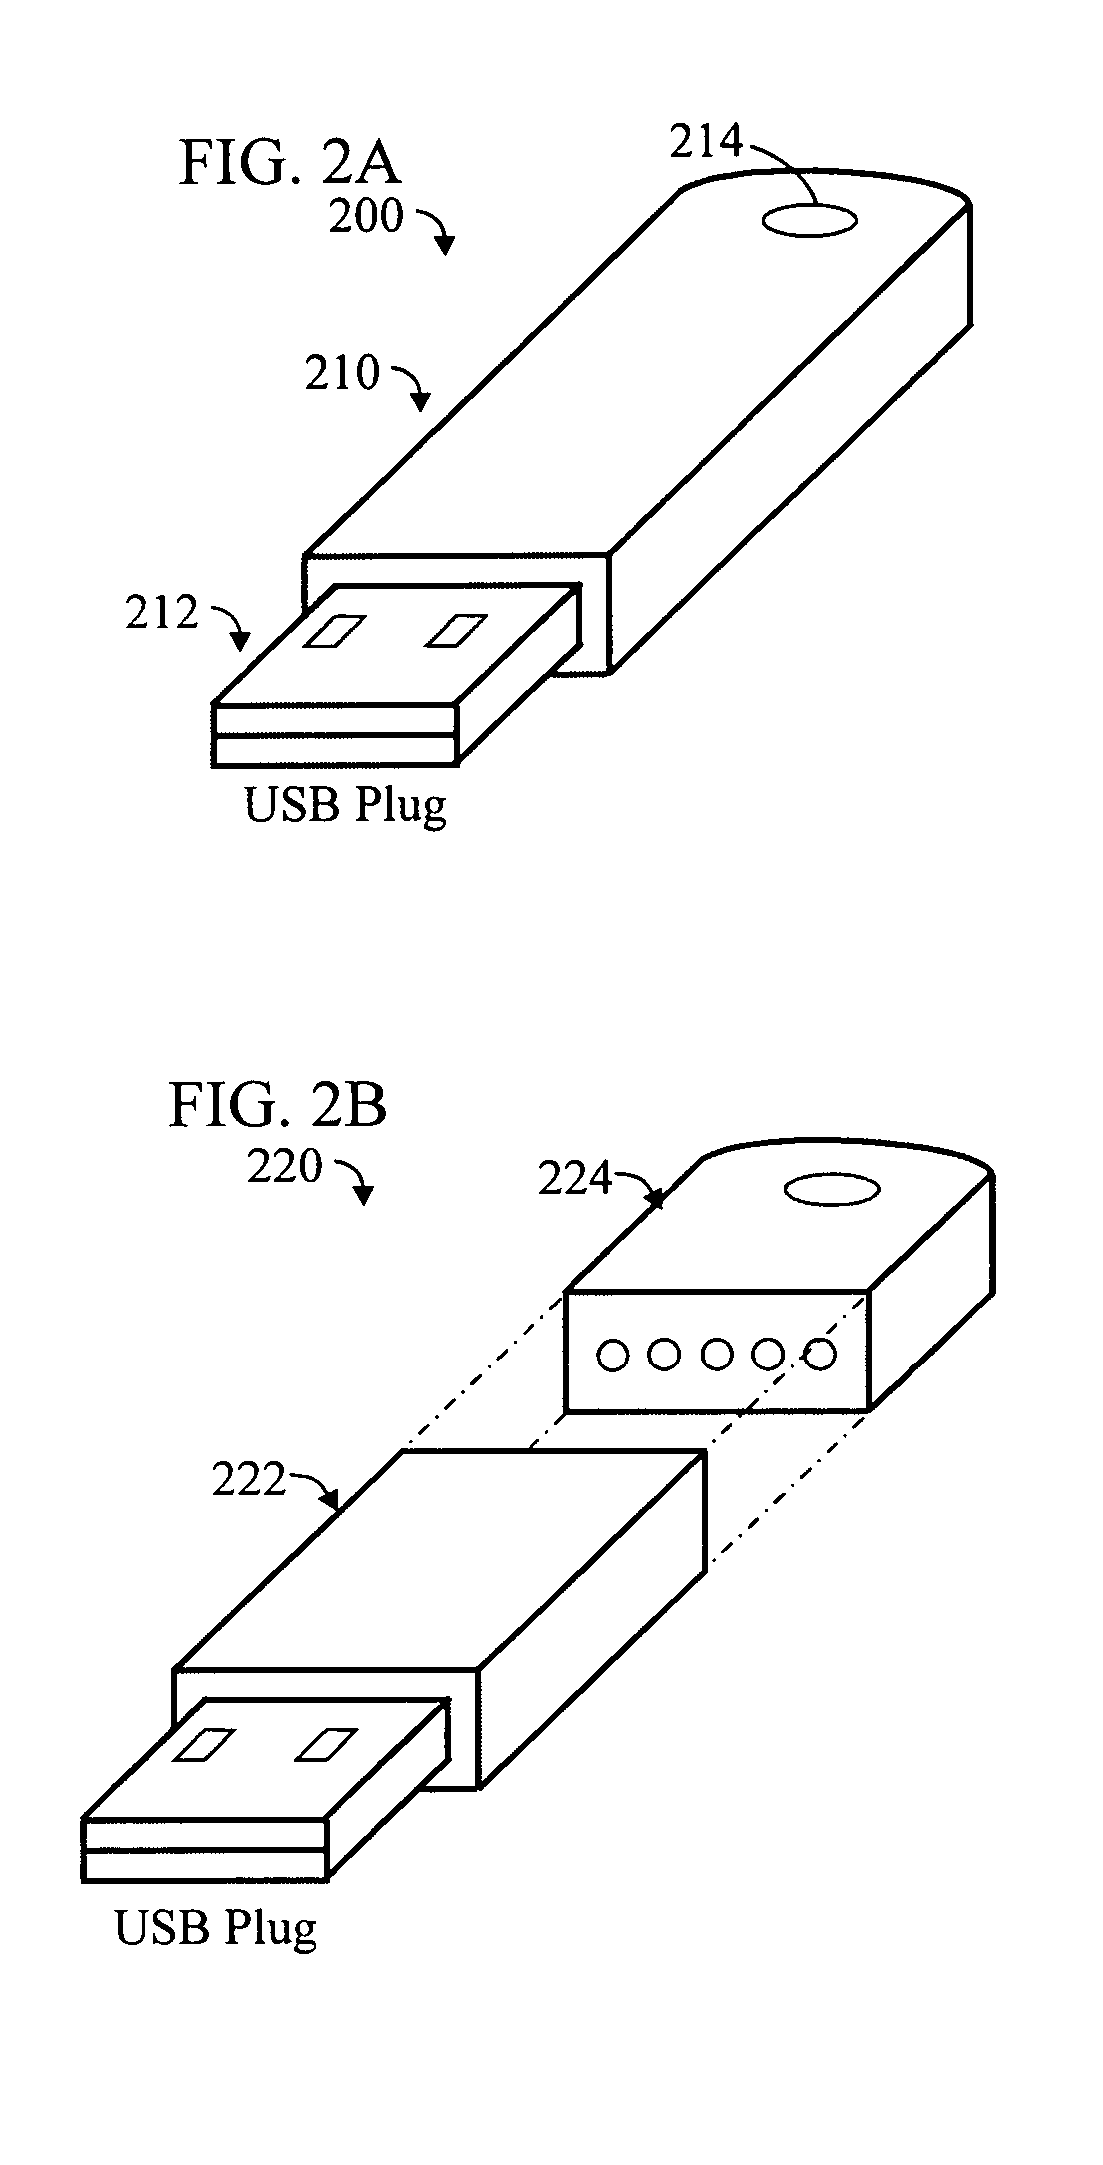 Multi-interface compact personal token apparatus and methods of use